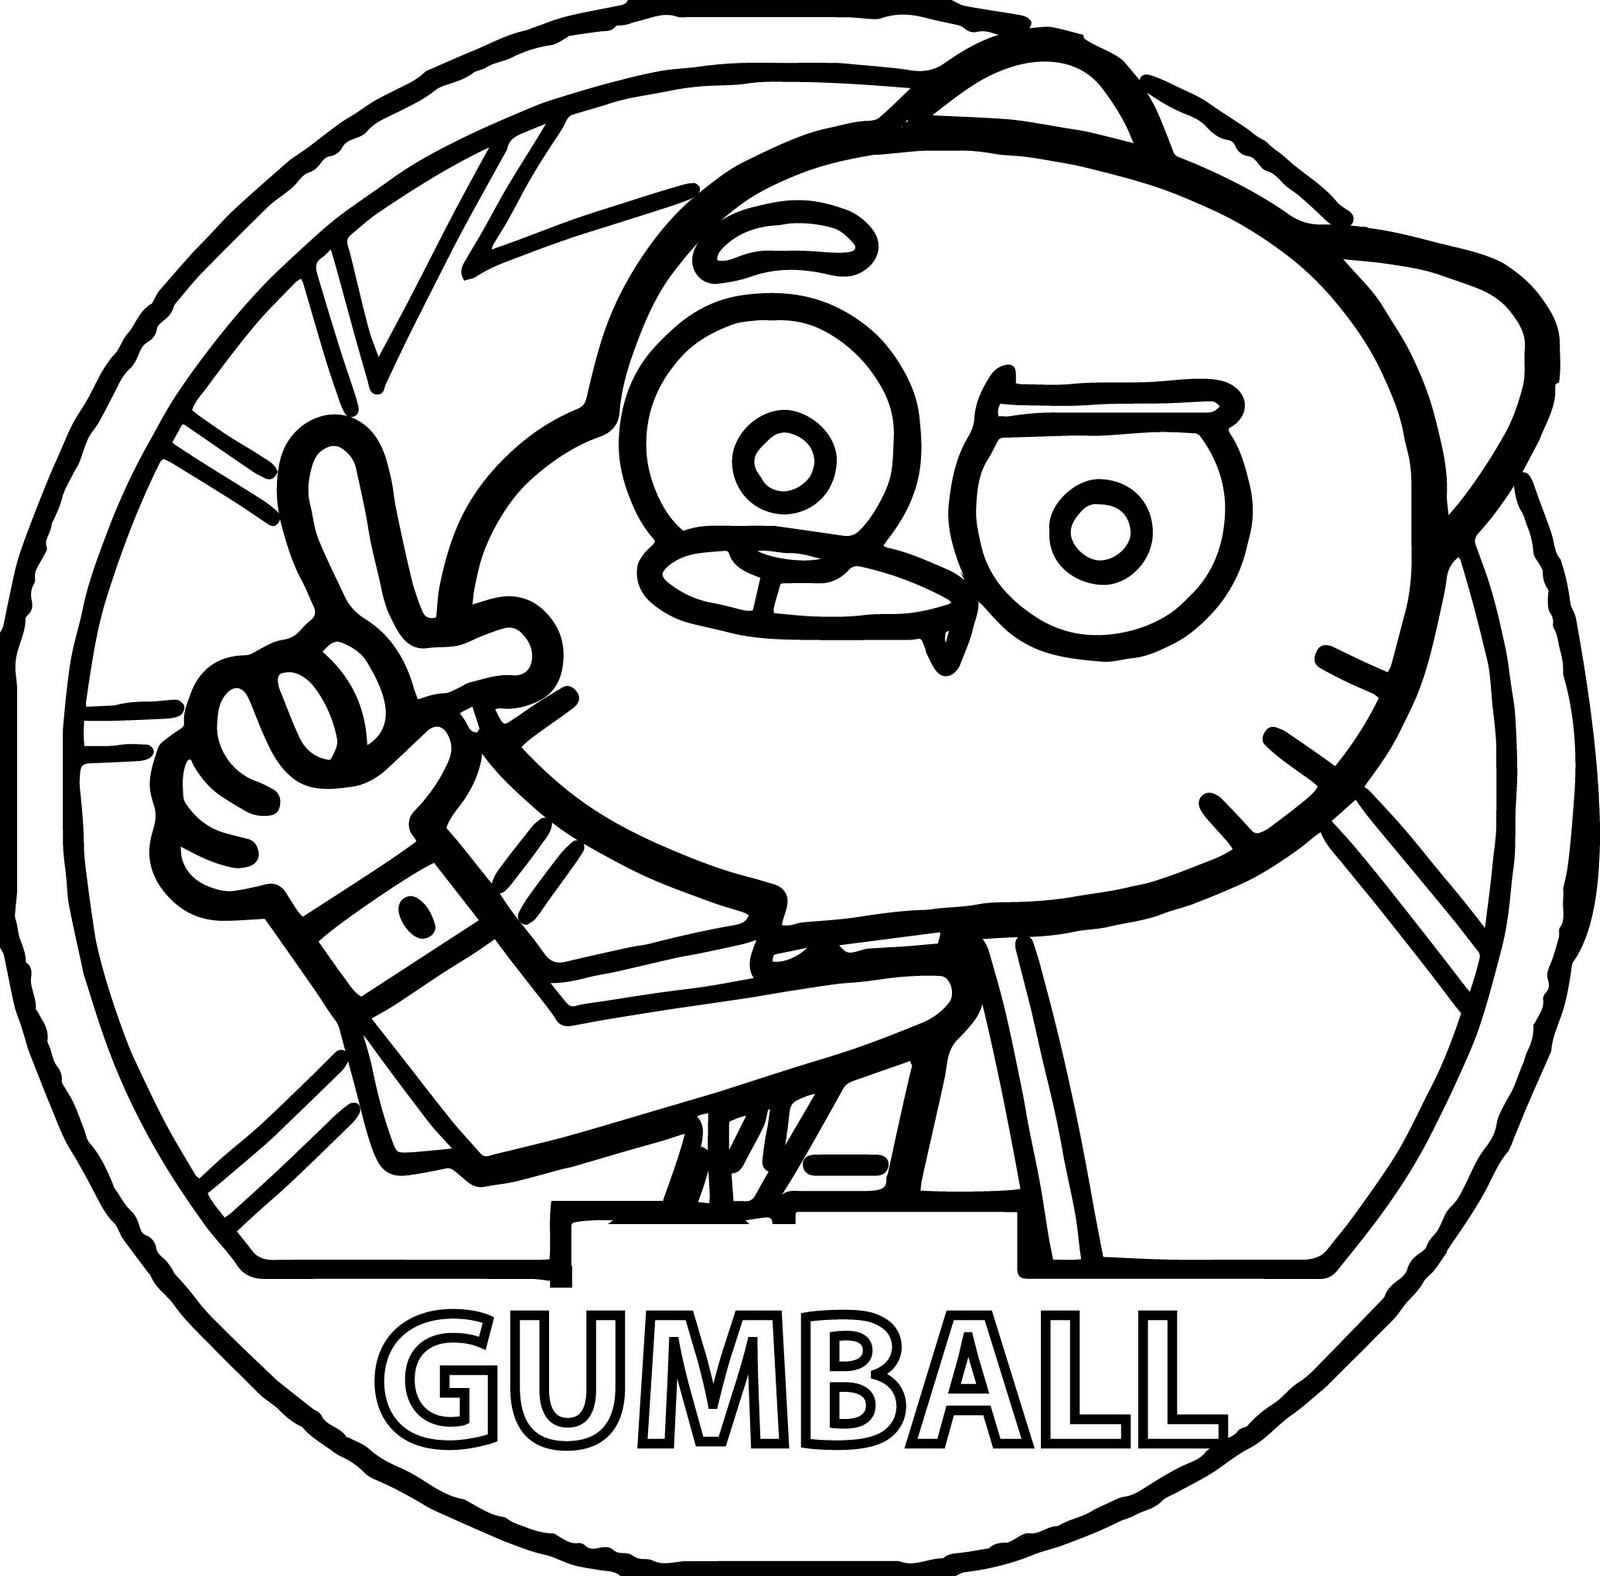 Amazing World Of Gumball Coloring Pages Pdf For Kids - Gumball coloring sheet for children